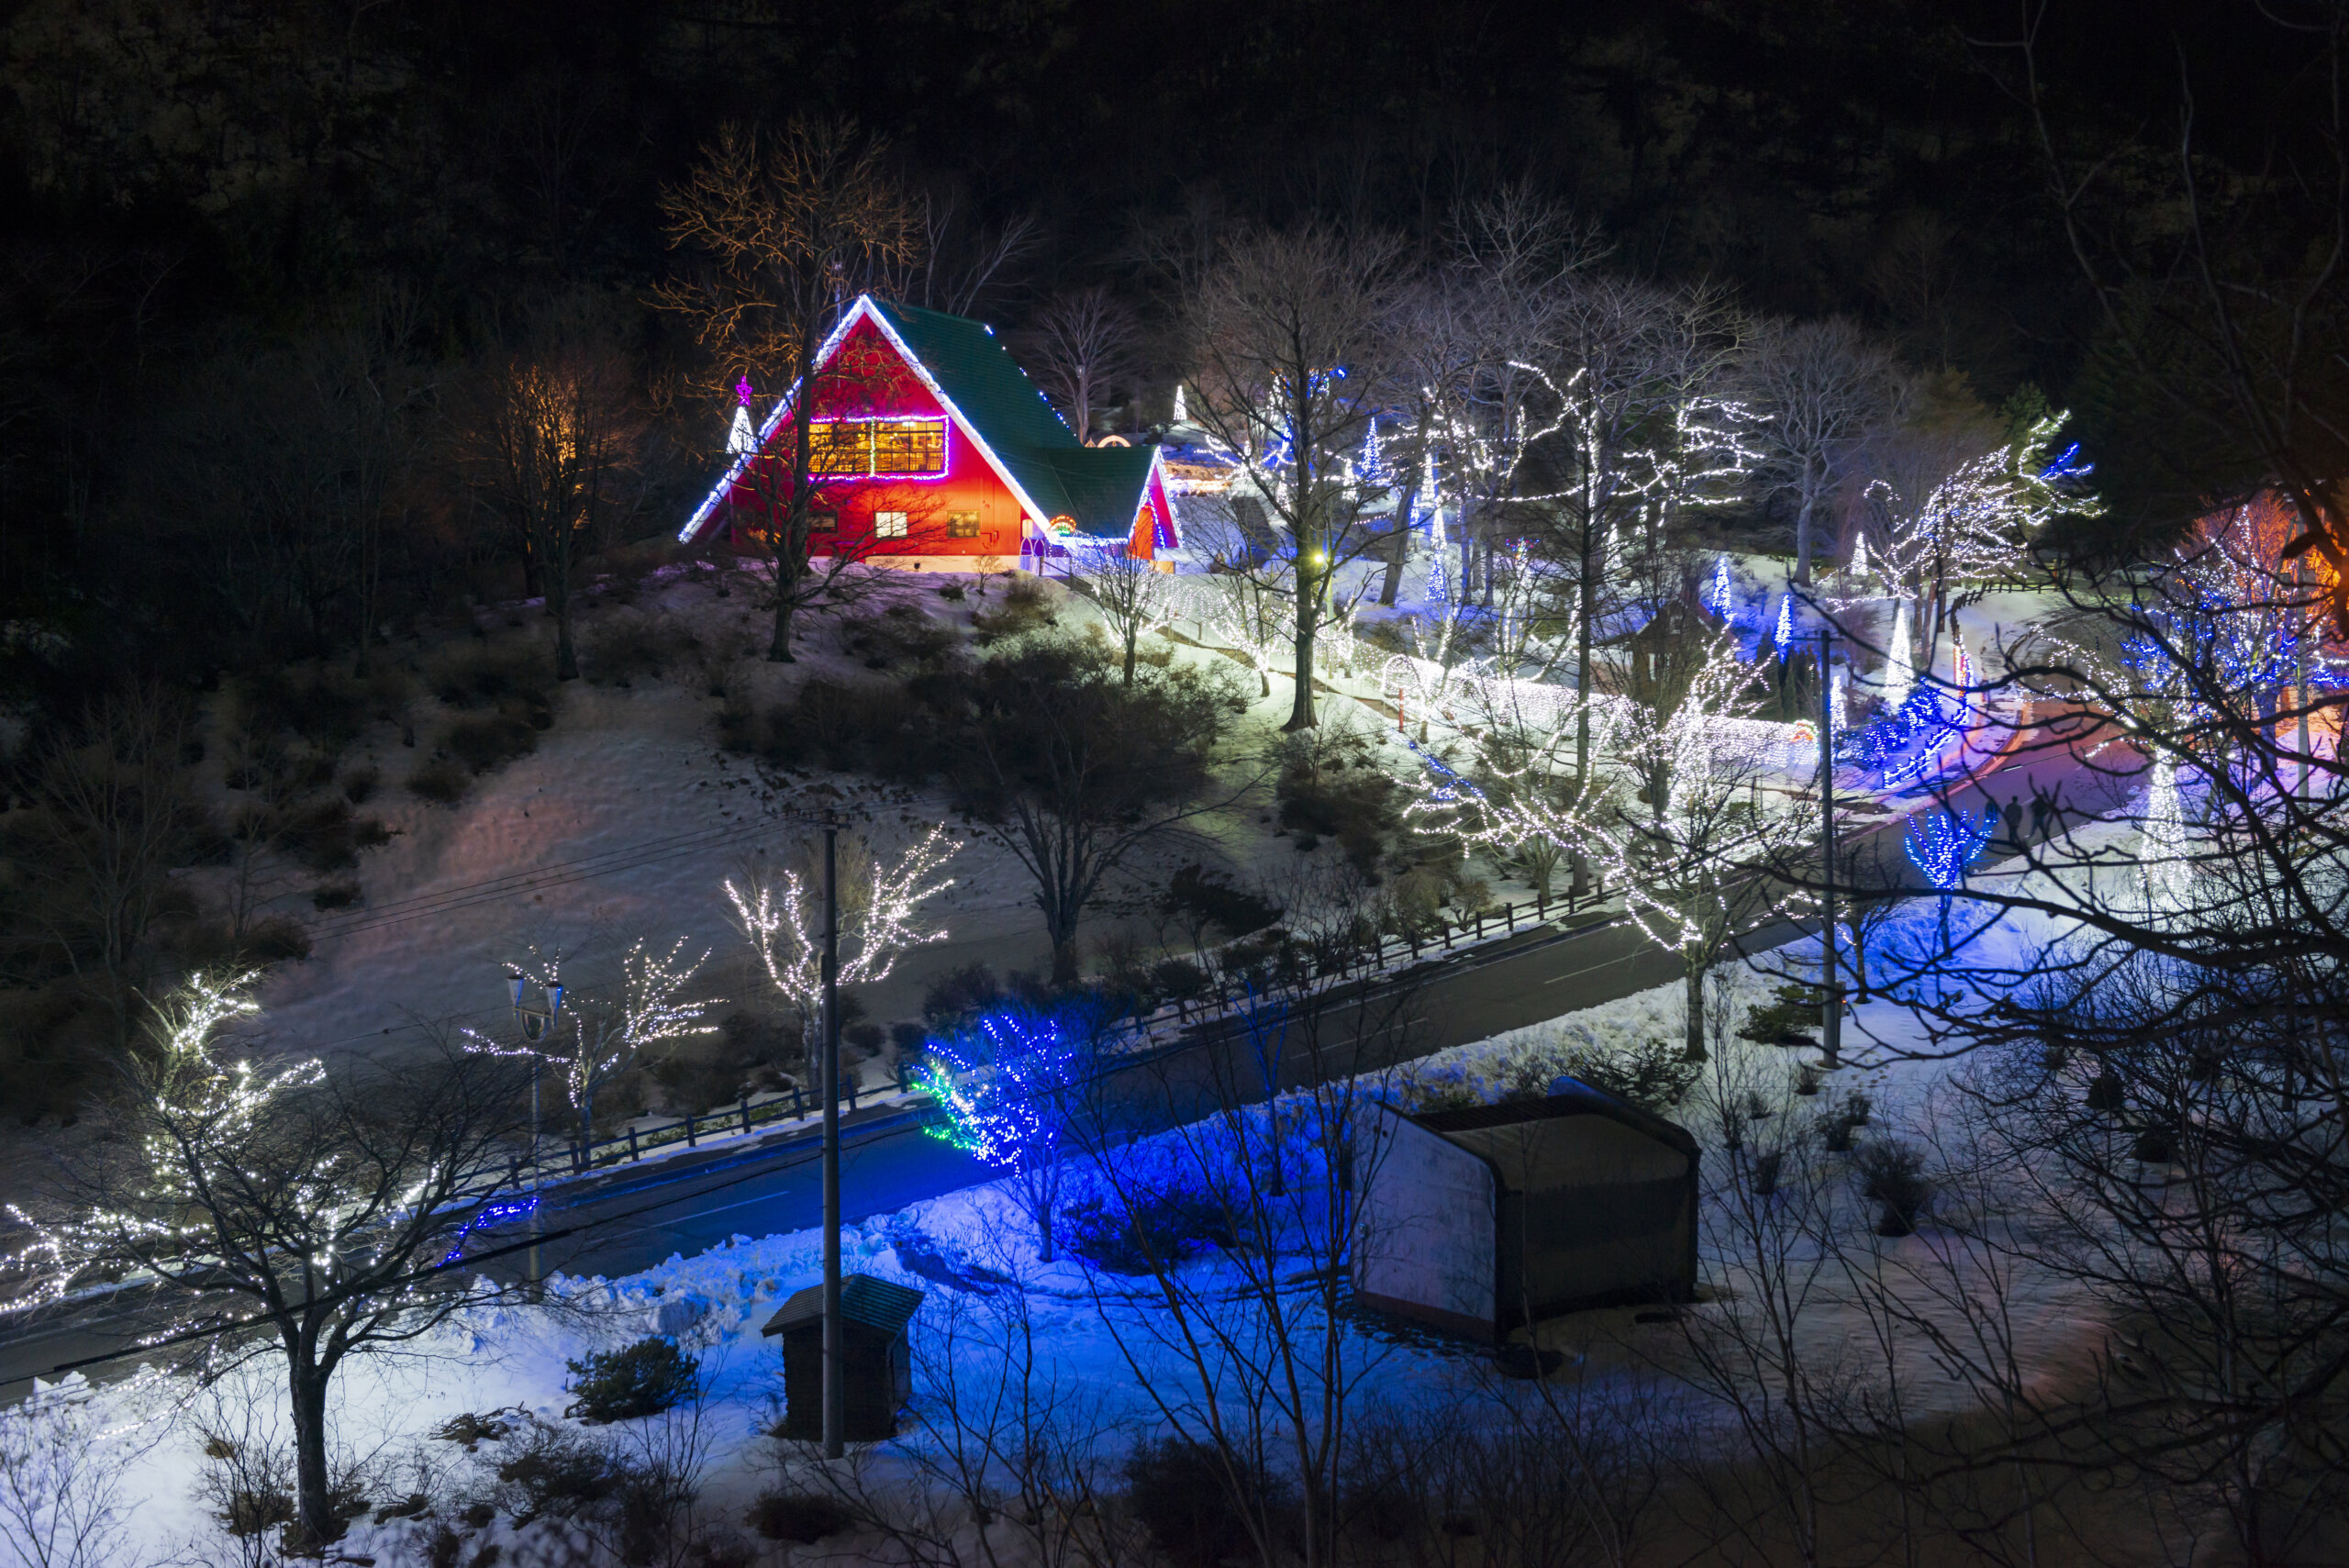 Enjoy the Magic of Santaland, Complete with Illuminations and a Christmas Market